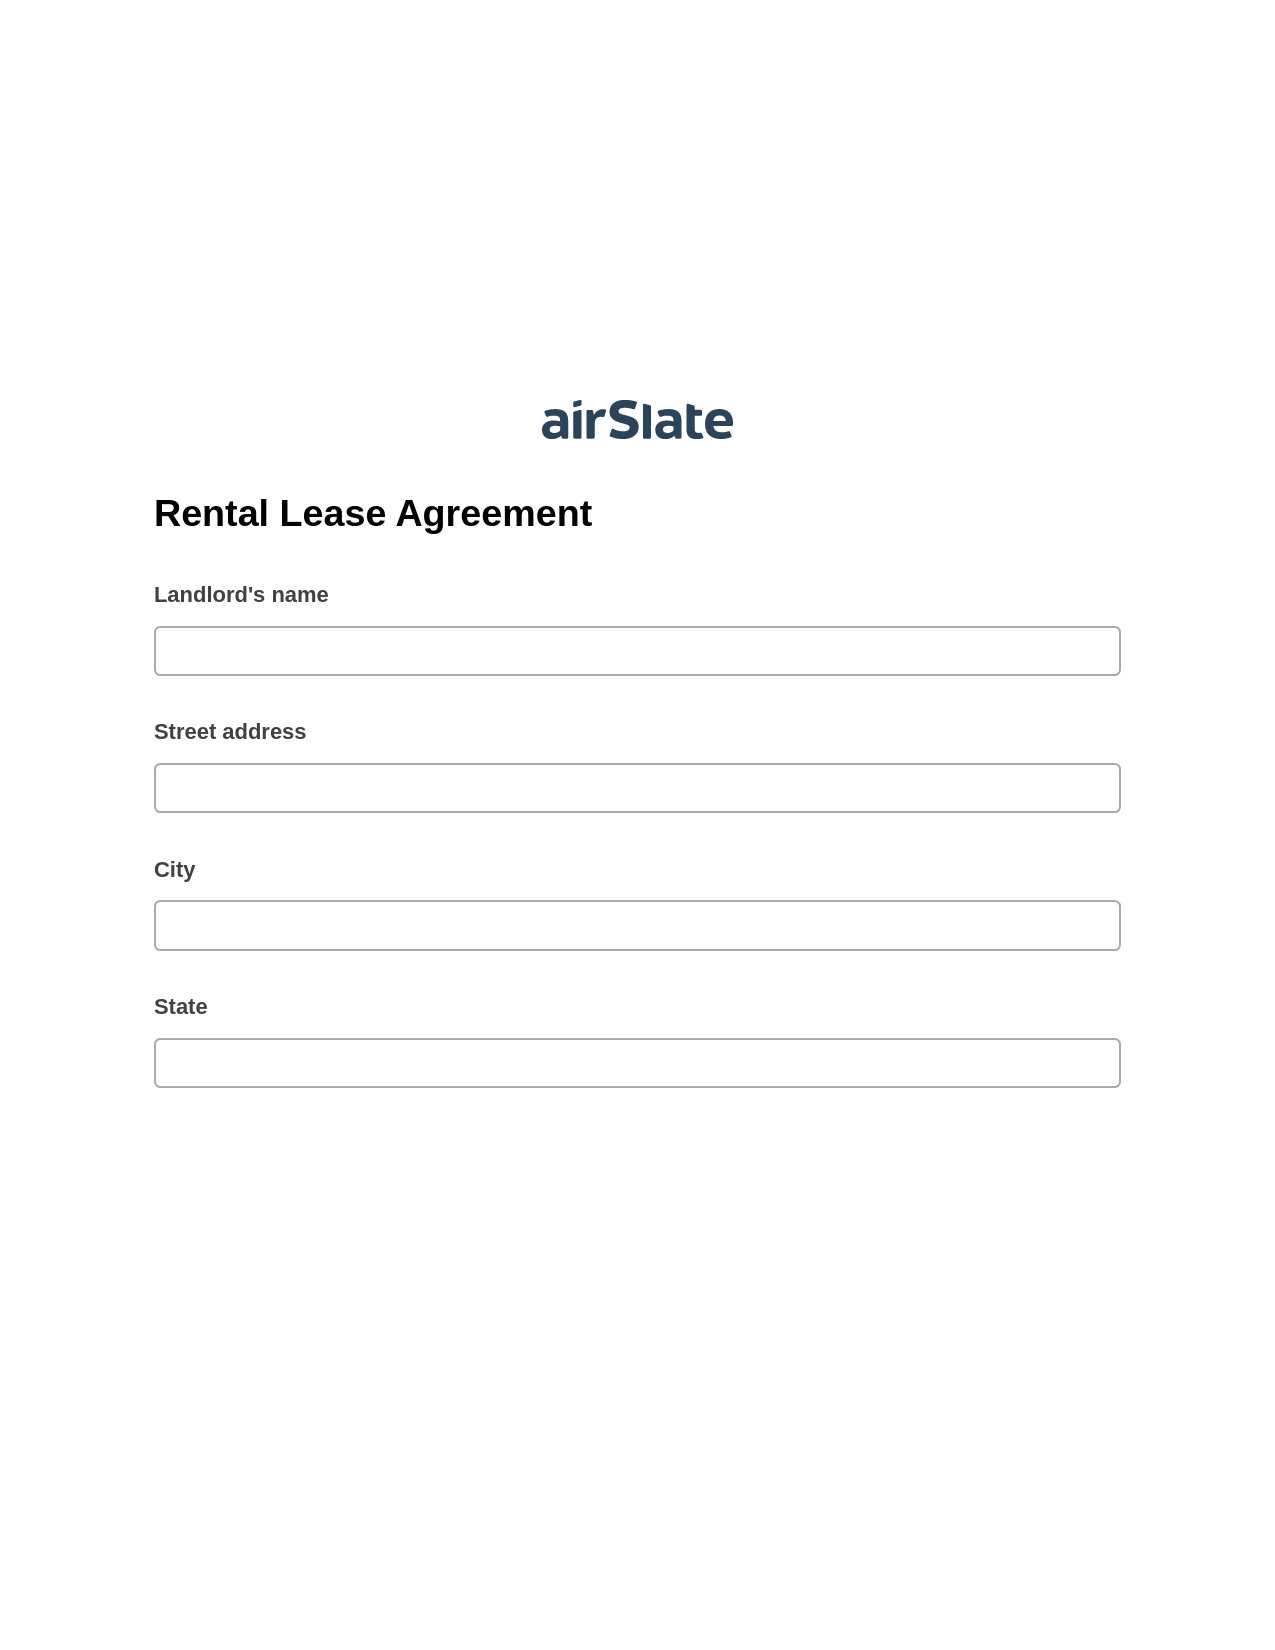 Multirole Rental Lease Agreement Pre-fill from MySQL Dropdown Options Bot, Invoke Salesforce Process Bot, Export to Excel 365 Bot